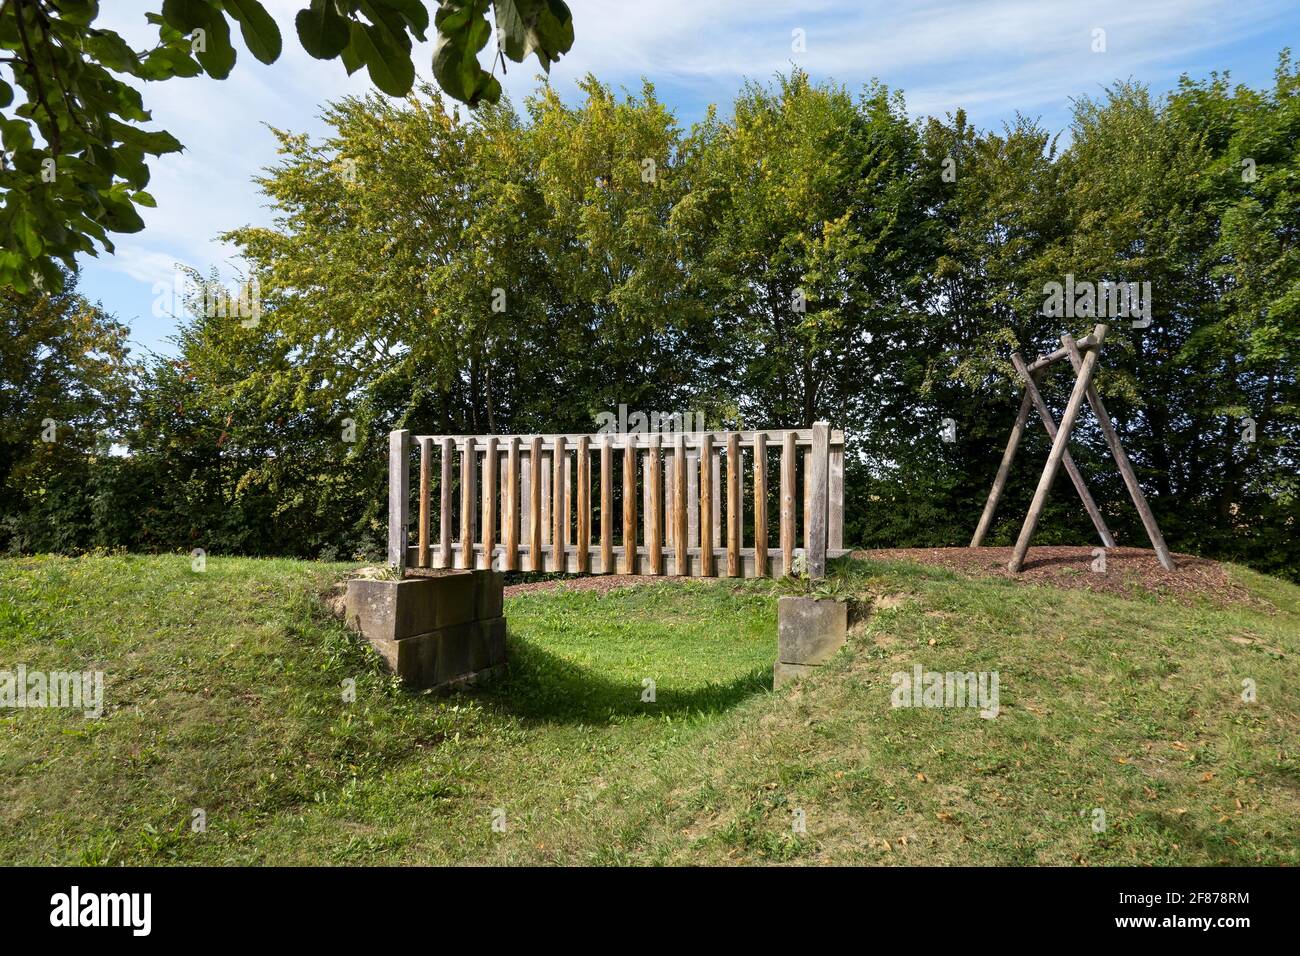 Small bridge made of wood in a childrens playground Stock Photo